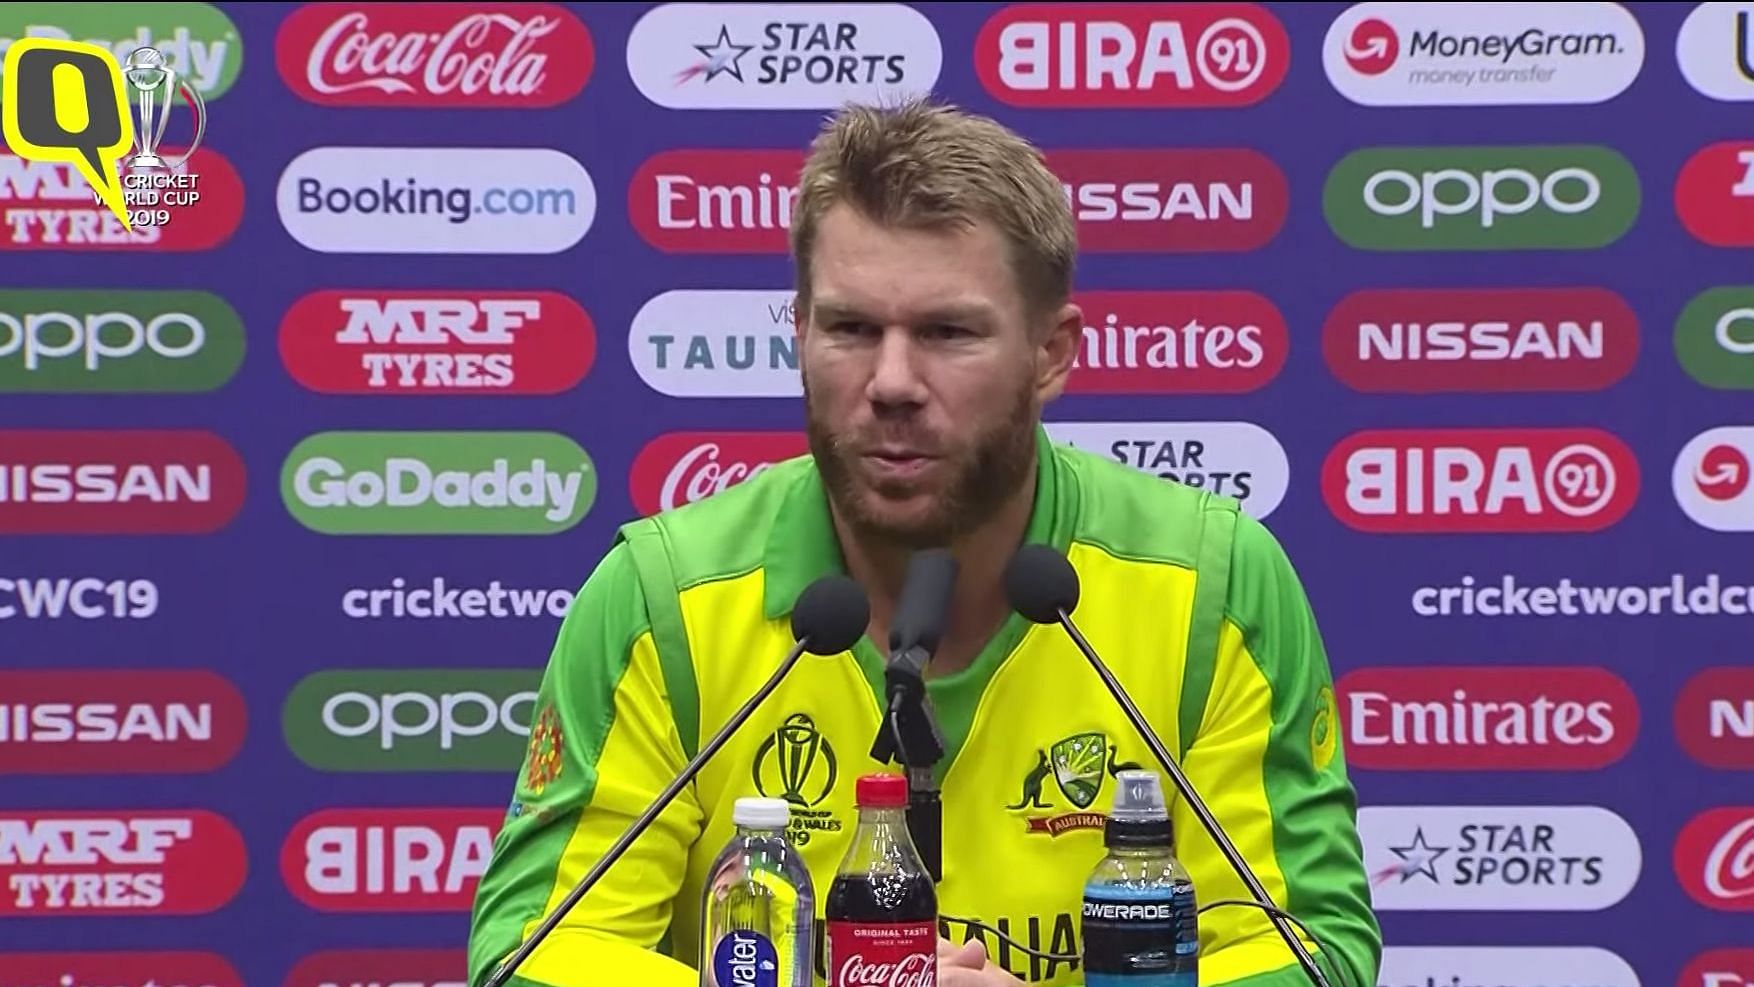 David Warner scored his first century against Pakistan in World Cup match after the ball-tampering ban.